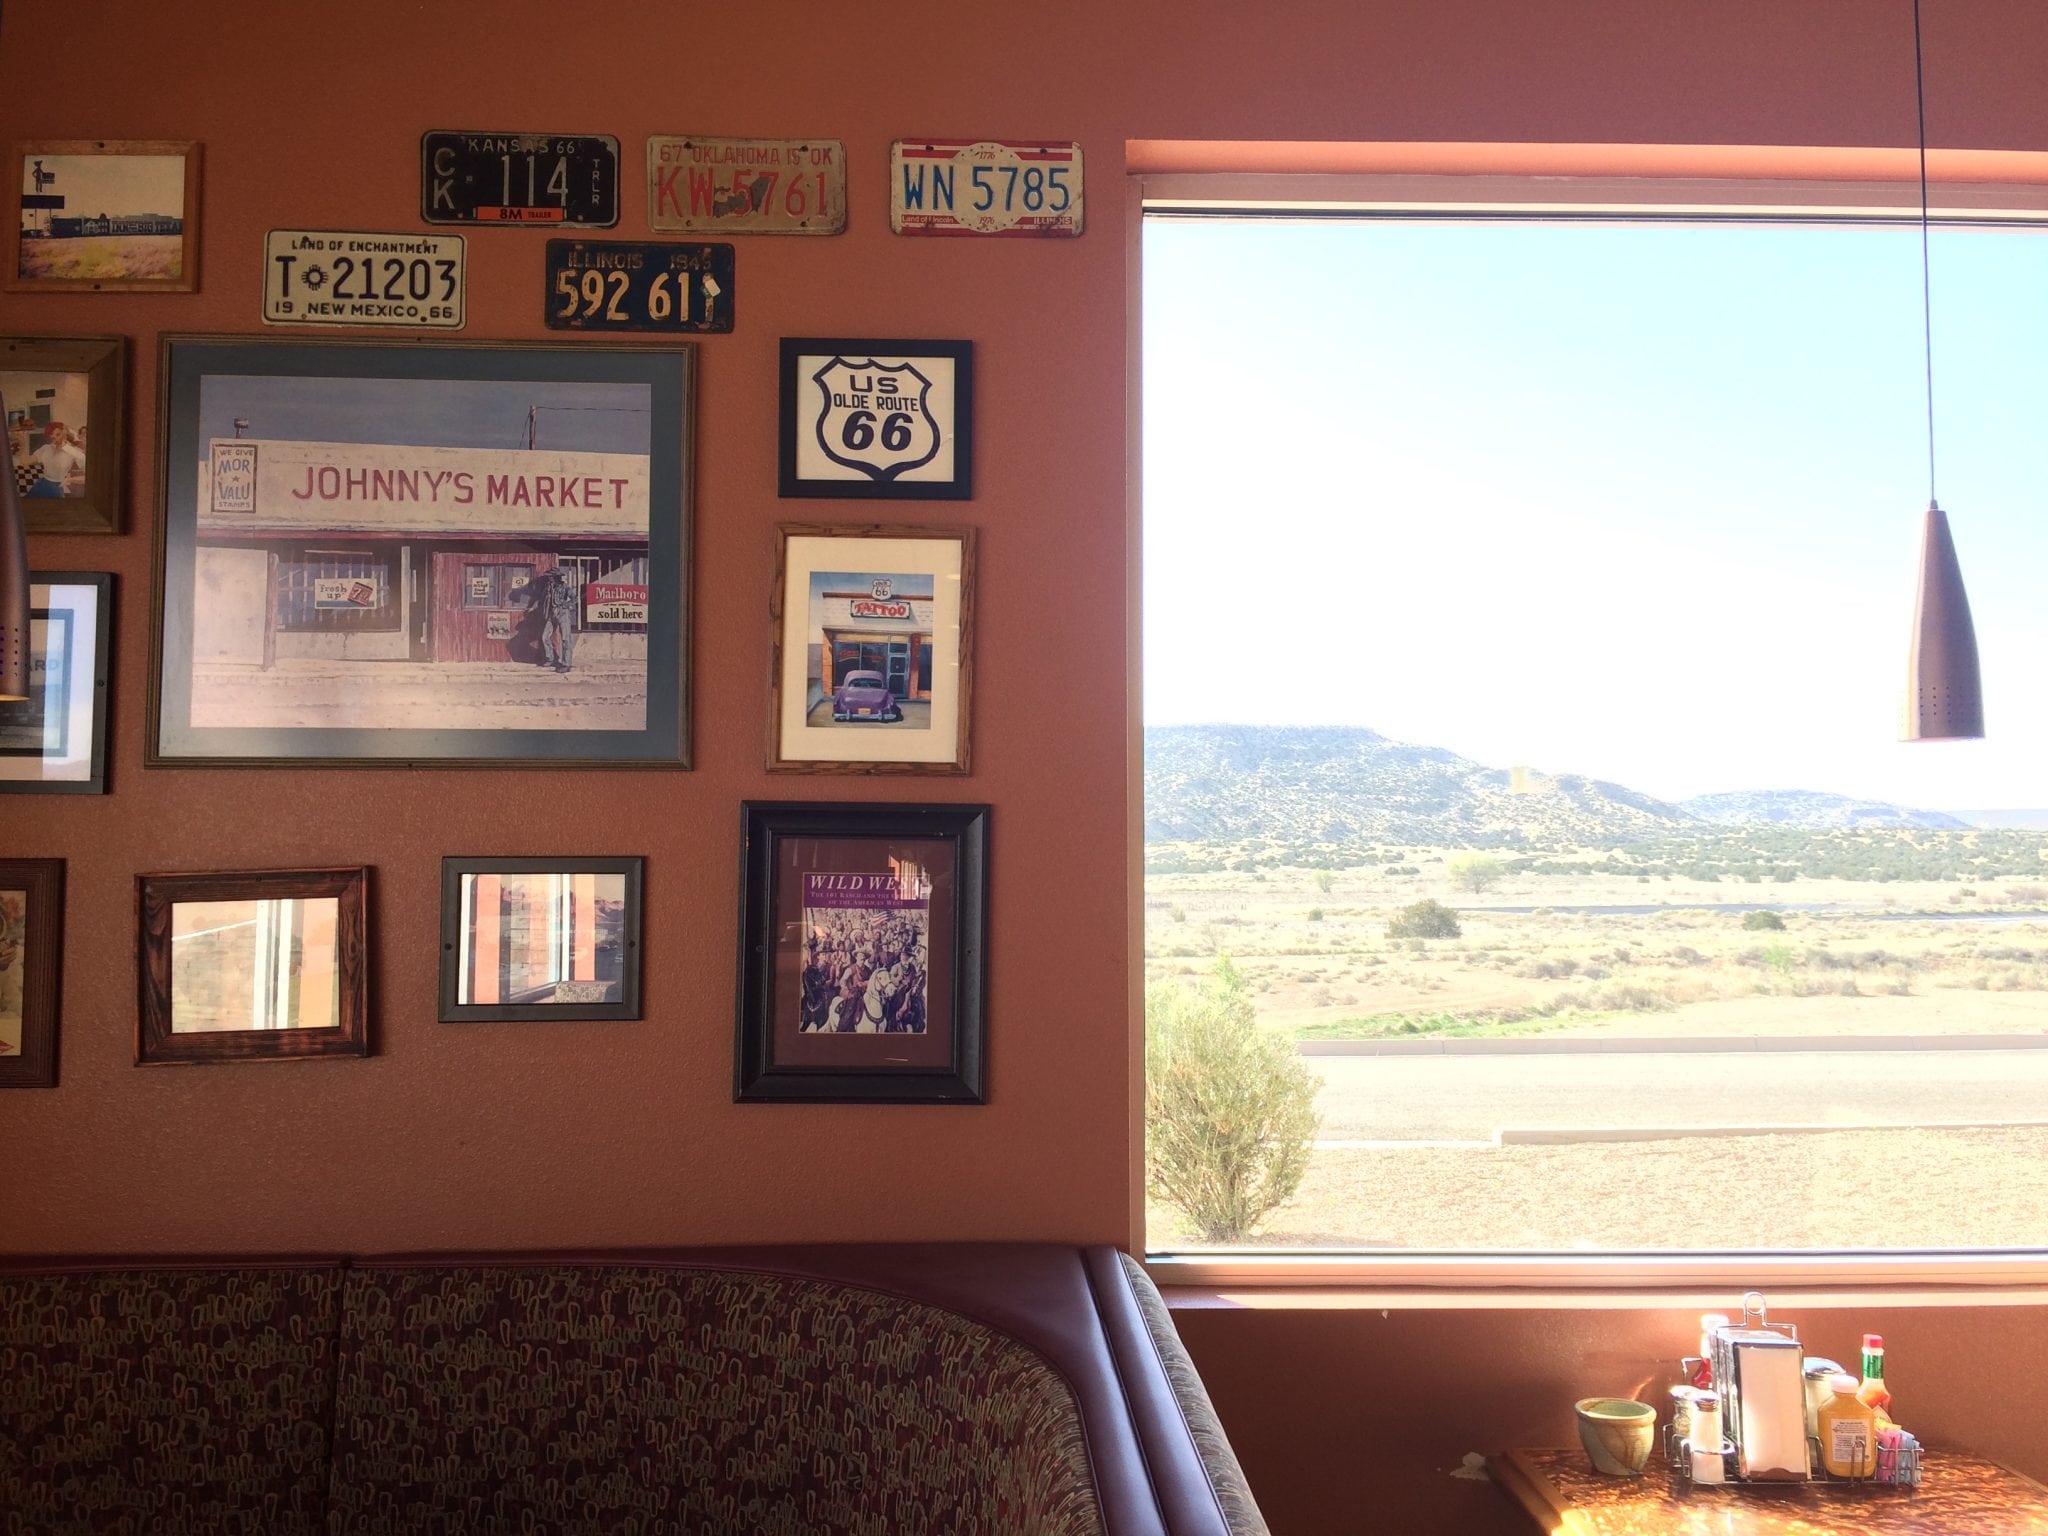 A diner along Route 66 just outside Albuquerque, New Mexico, in April 2017. Roadside hotel chains often target road trippers through nostalgic marketing campaigns.